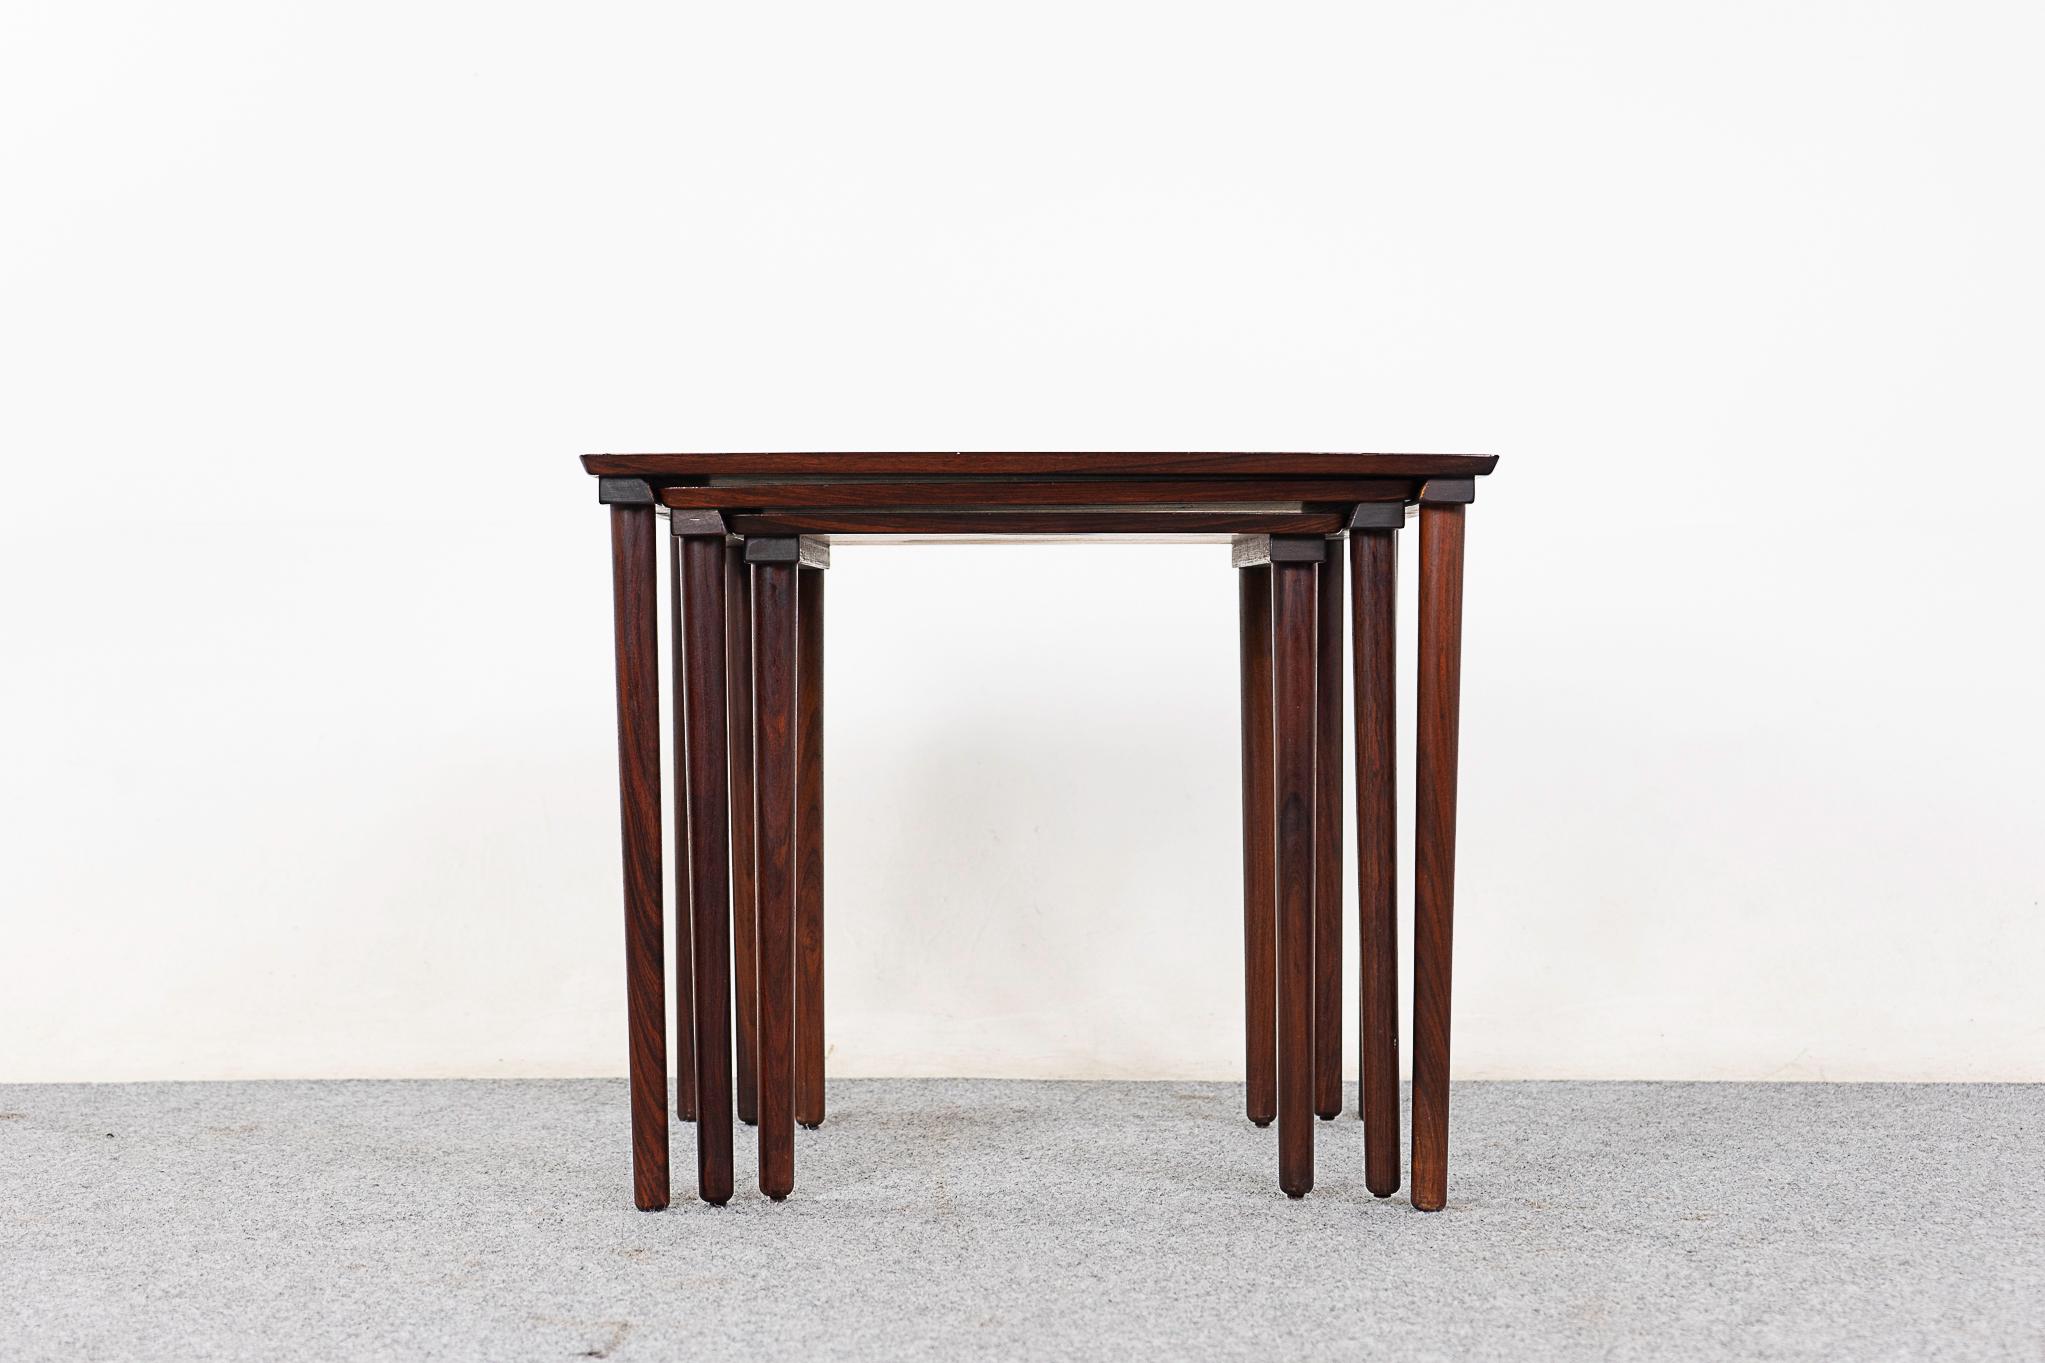 Rosewood nesting tables by Mobelintarsia, circa 1960's. Book matched veneer and solid wood trim, use individually or nest them together to save space. Mobelintarsia makers' mark intact.

Unrestored item, some marks consistent with age.